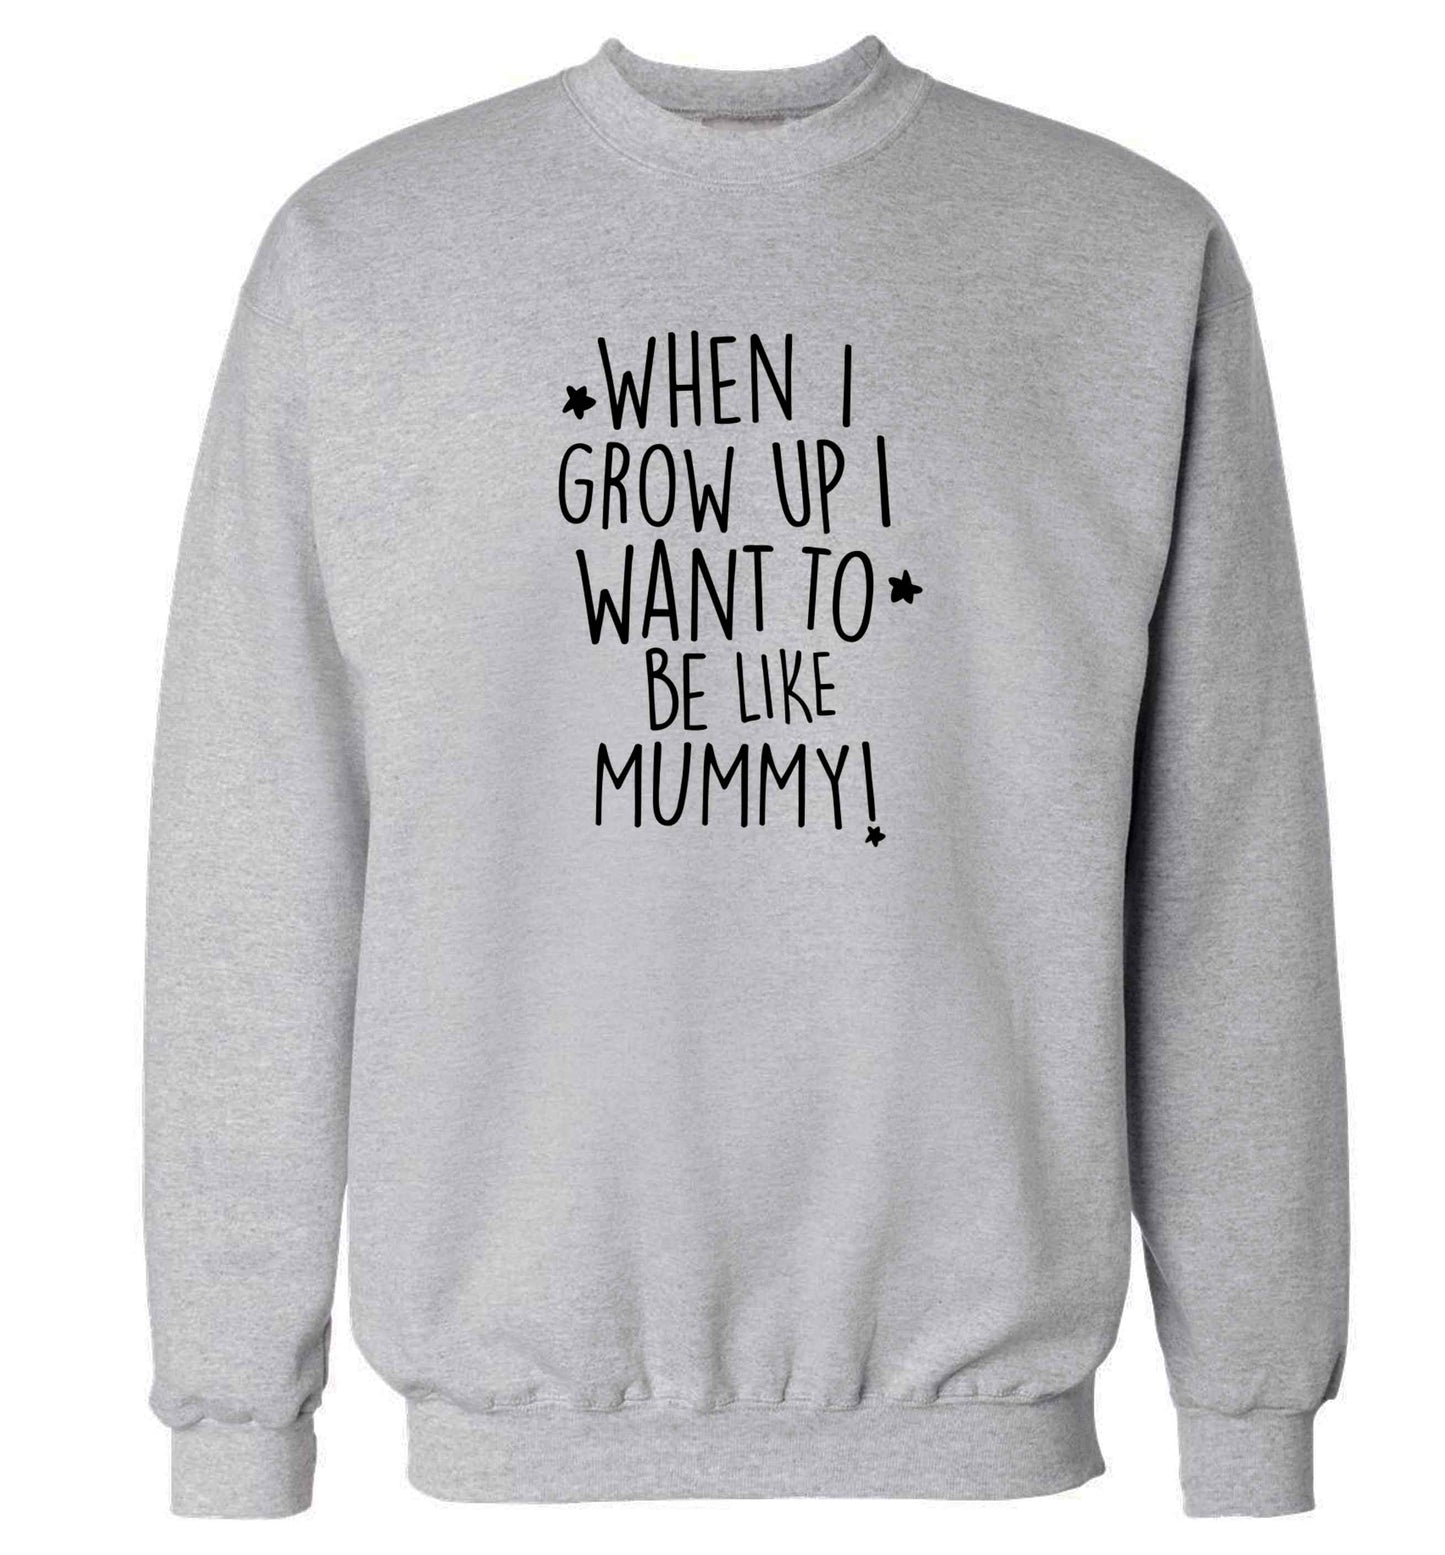 When I grow up I want to be like my mummy adult's unisex grey sweater 2XL